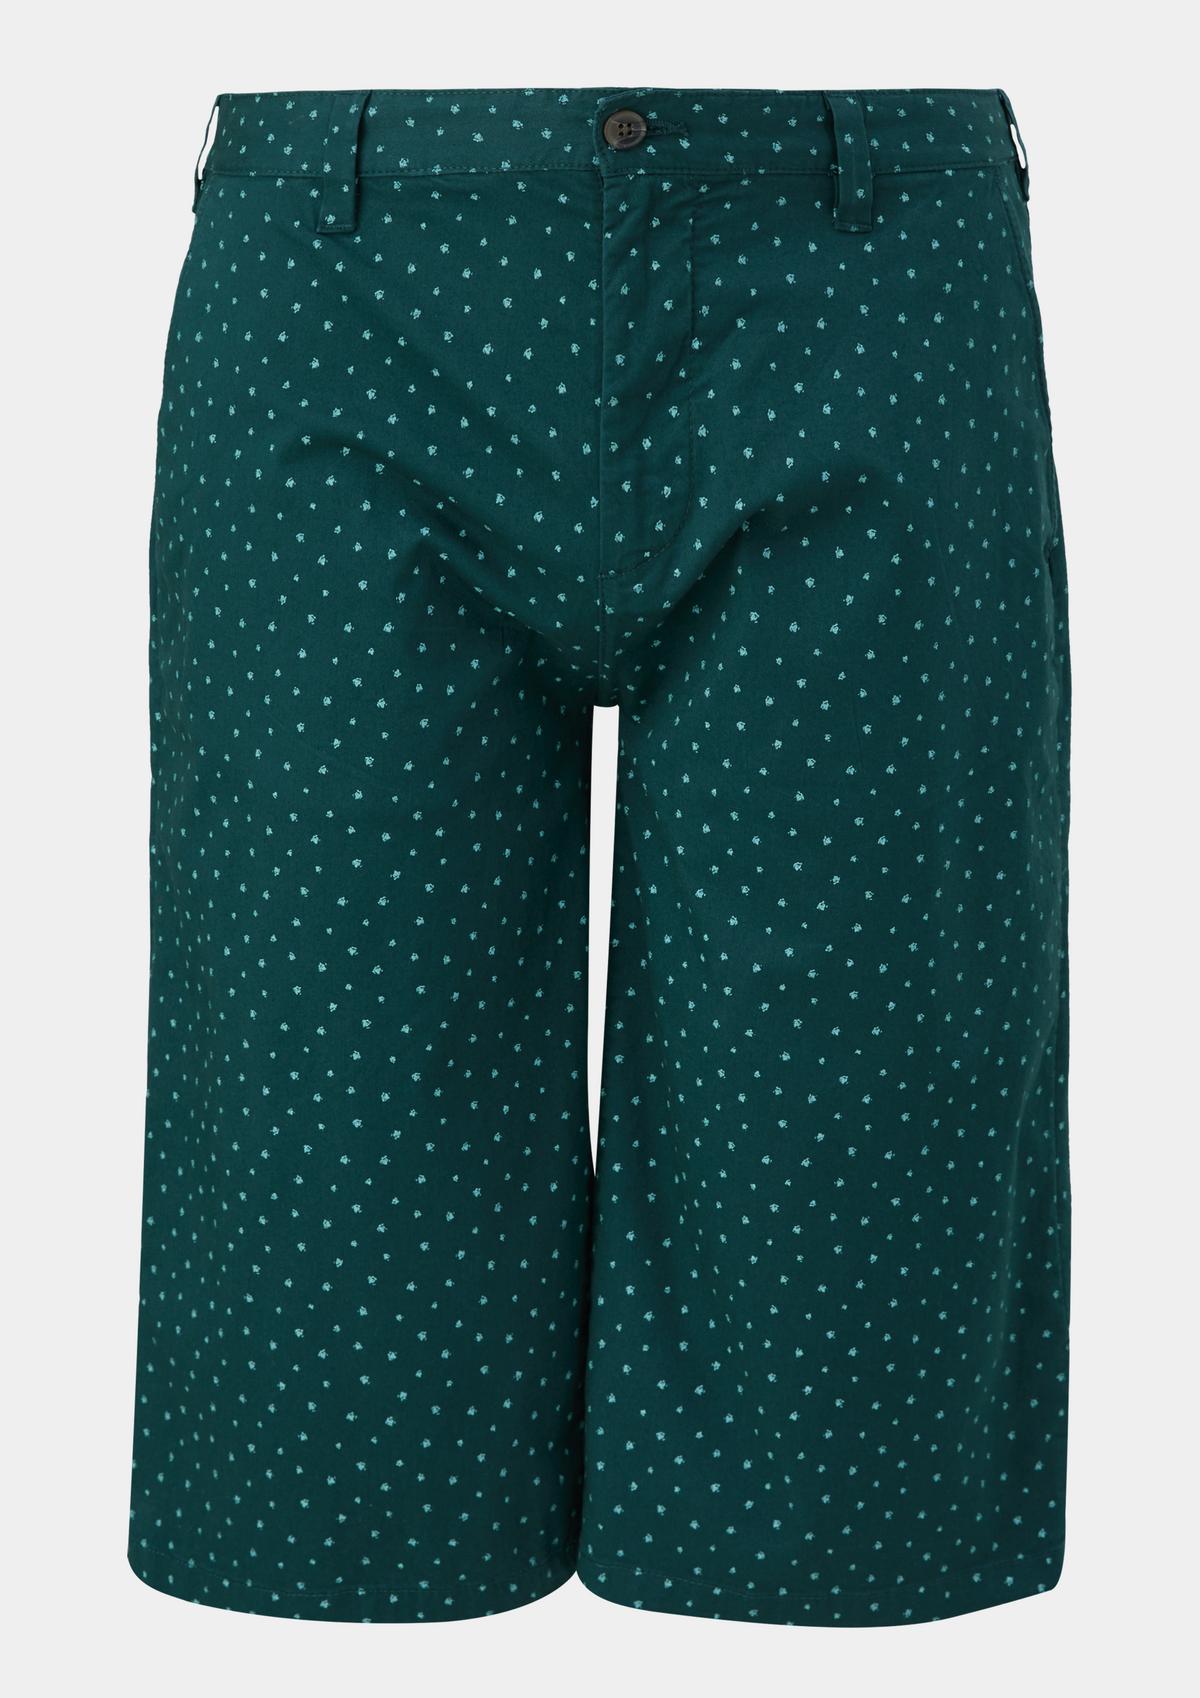 s.Oliver Slim fit: Bermudas with an all-over print